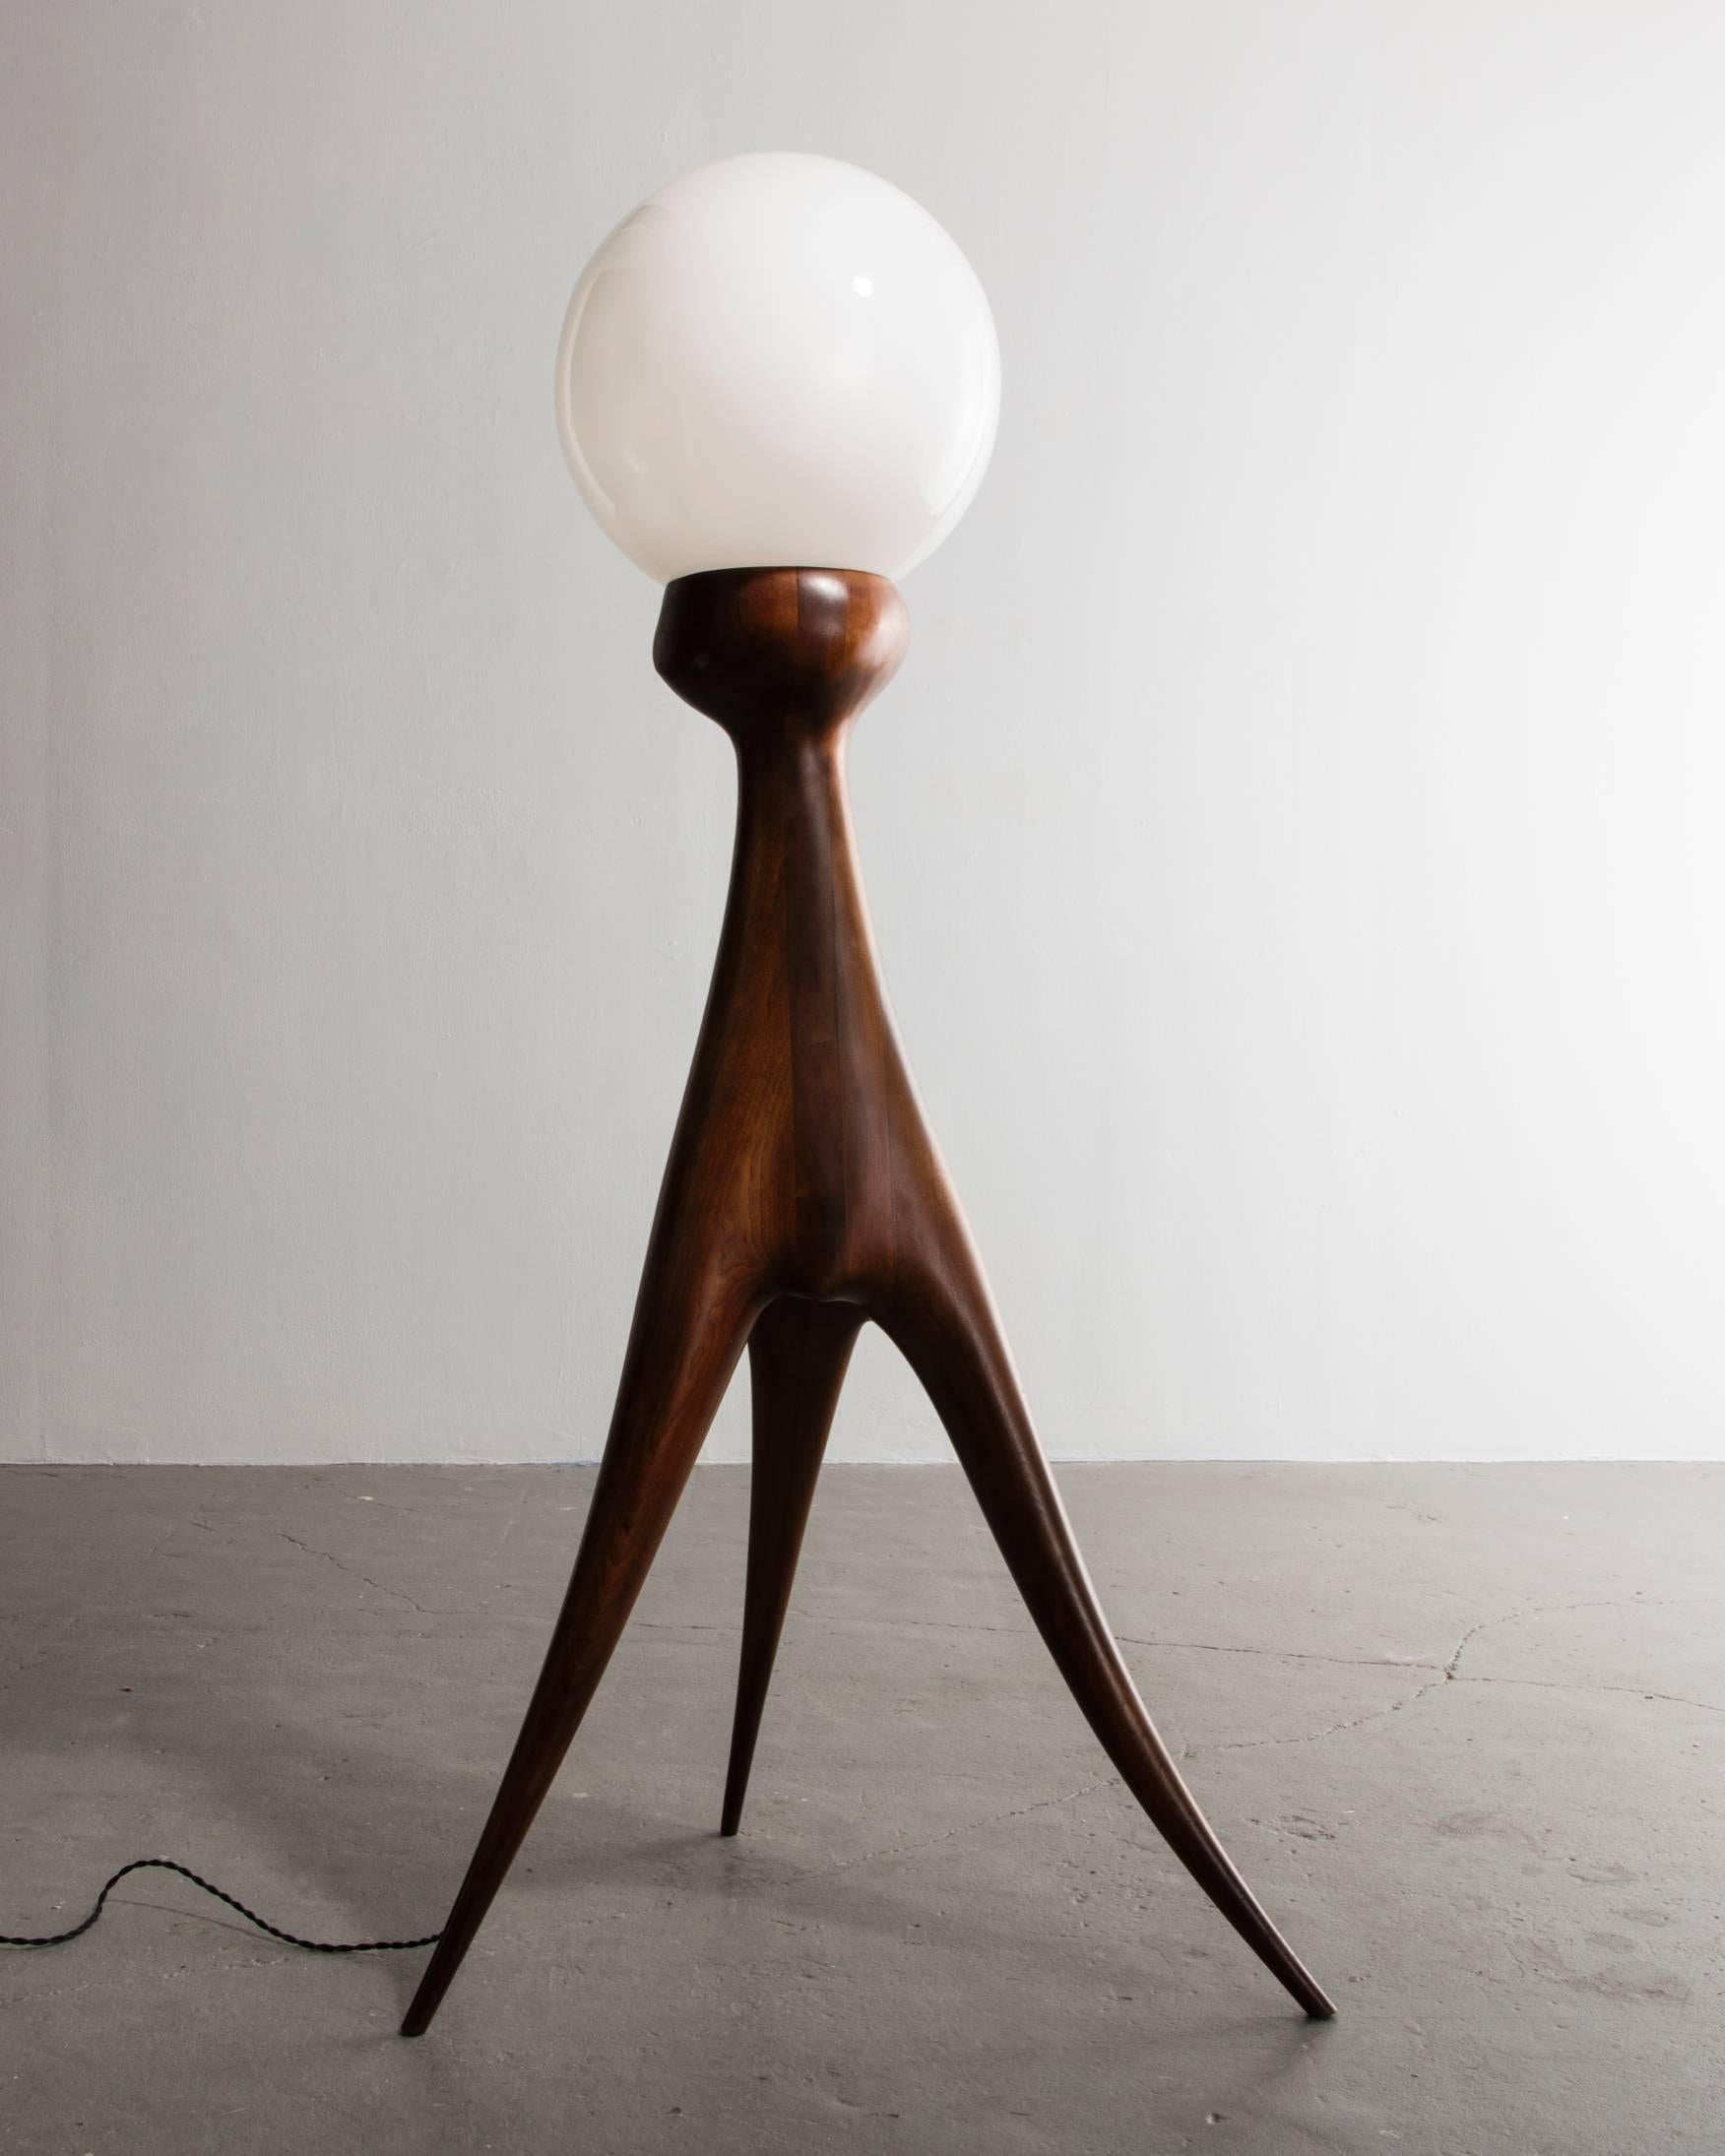 Unique hand-shaped floor lamp in stack-laminated walnut with glass globe. Designed and made by Wendell Castle, Rochester, New York, circa 1966.